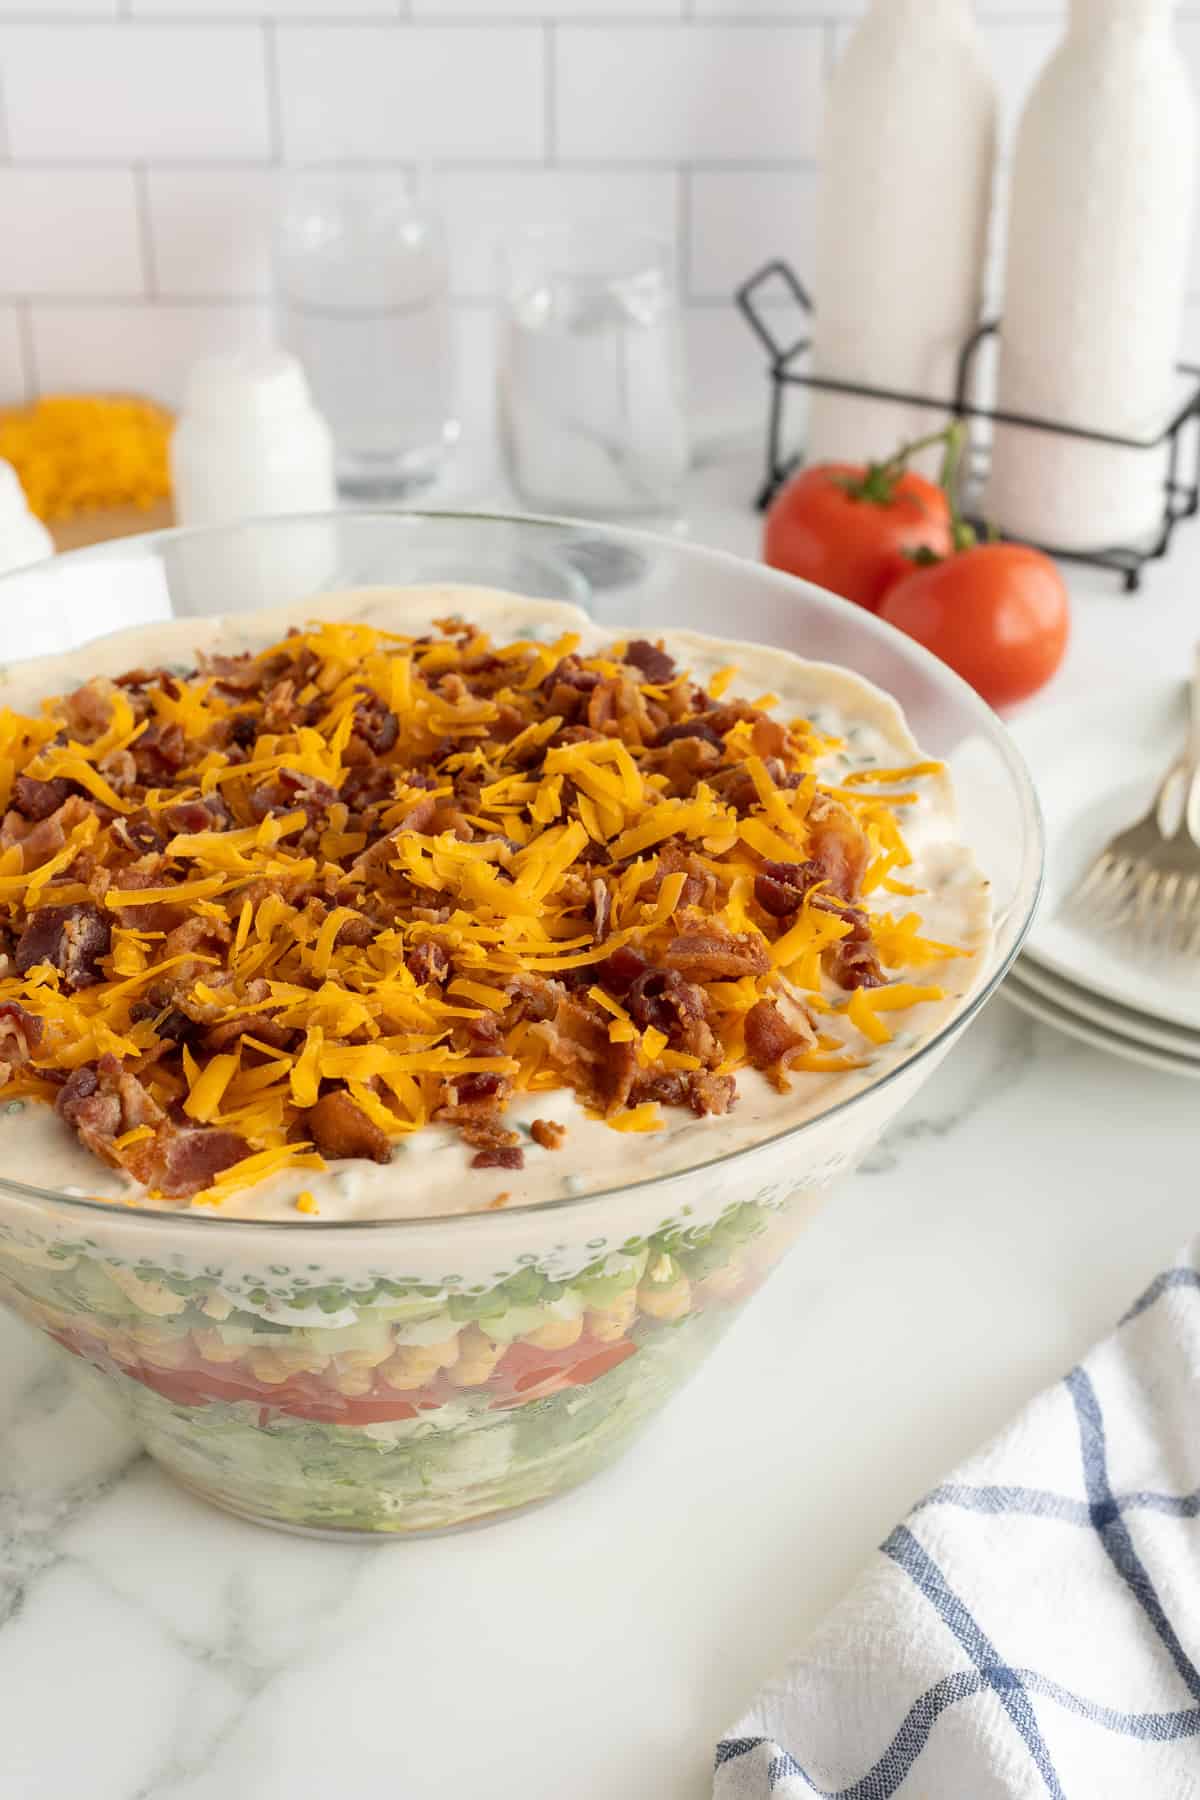 A layered salad in a glass dish topped with shredded cheddar cheese and crumbled bacon on a kitchen counter.